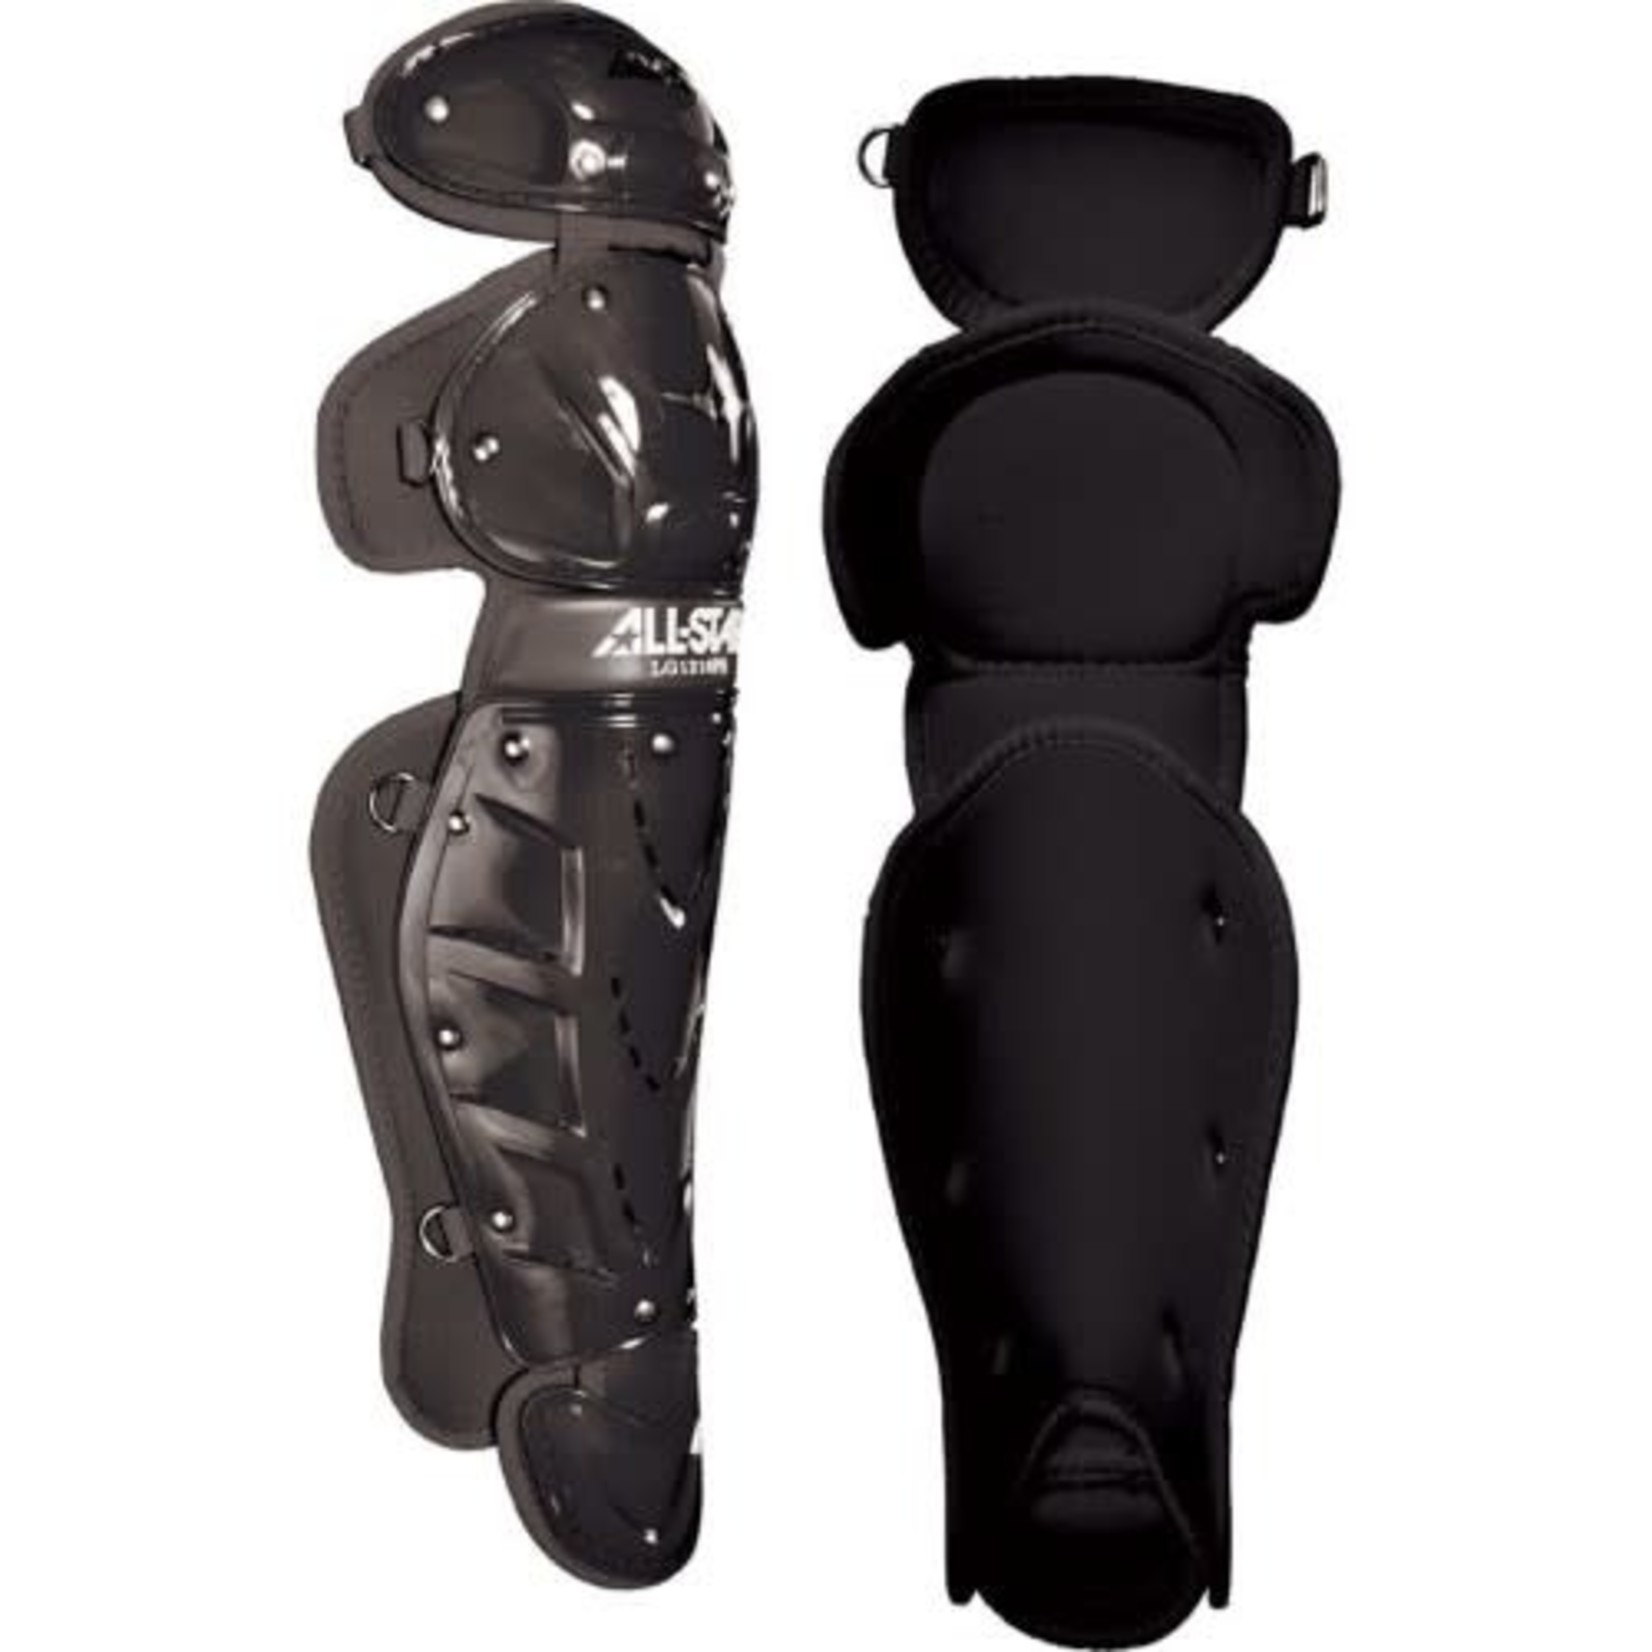 All Star All Star Youth Player's Series Catcher's Leg Guards - Navy